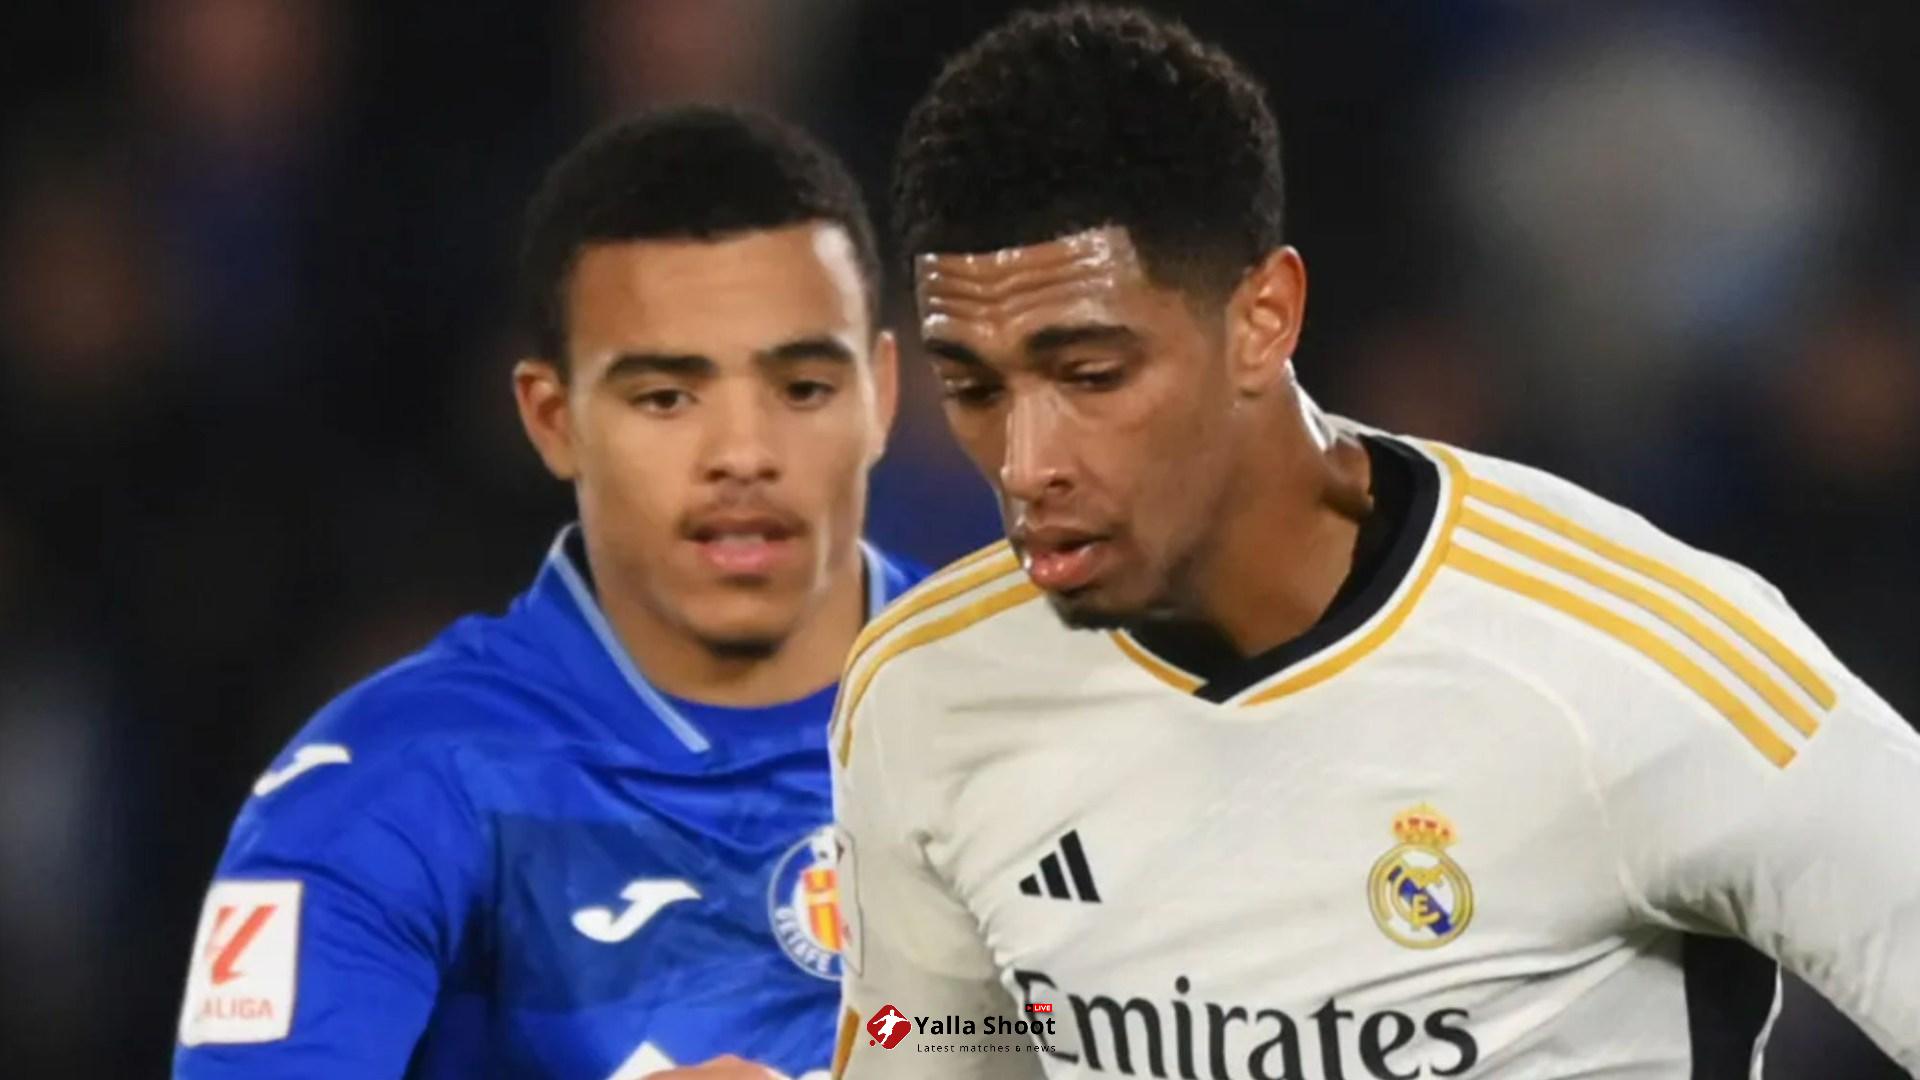 Getafe boss defends Mason Greenwood as a 'great guy' after Man Utd loanee's alleged clash with Jude Bellingham